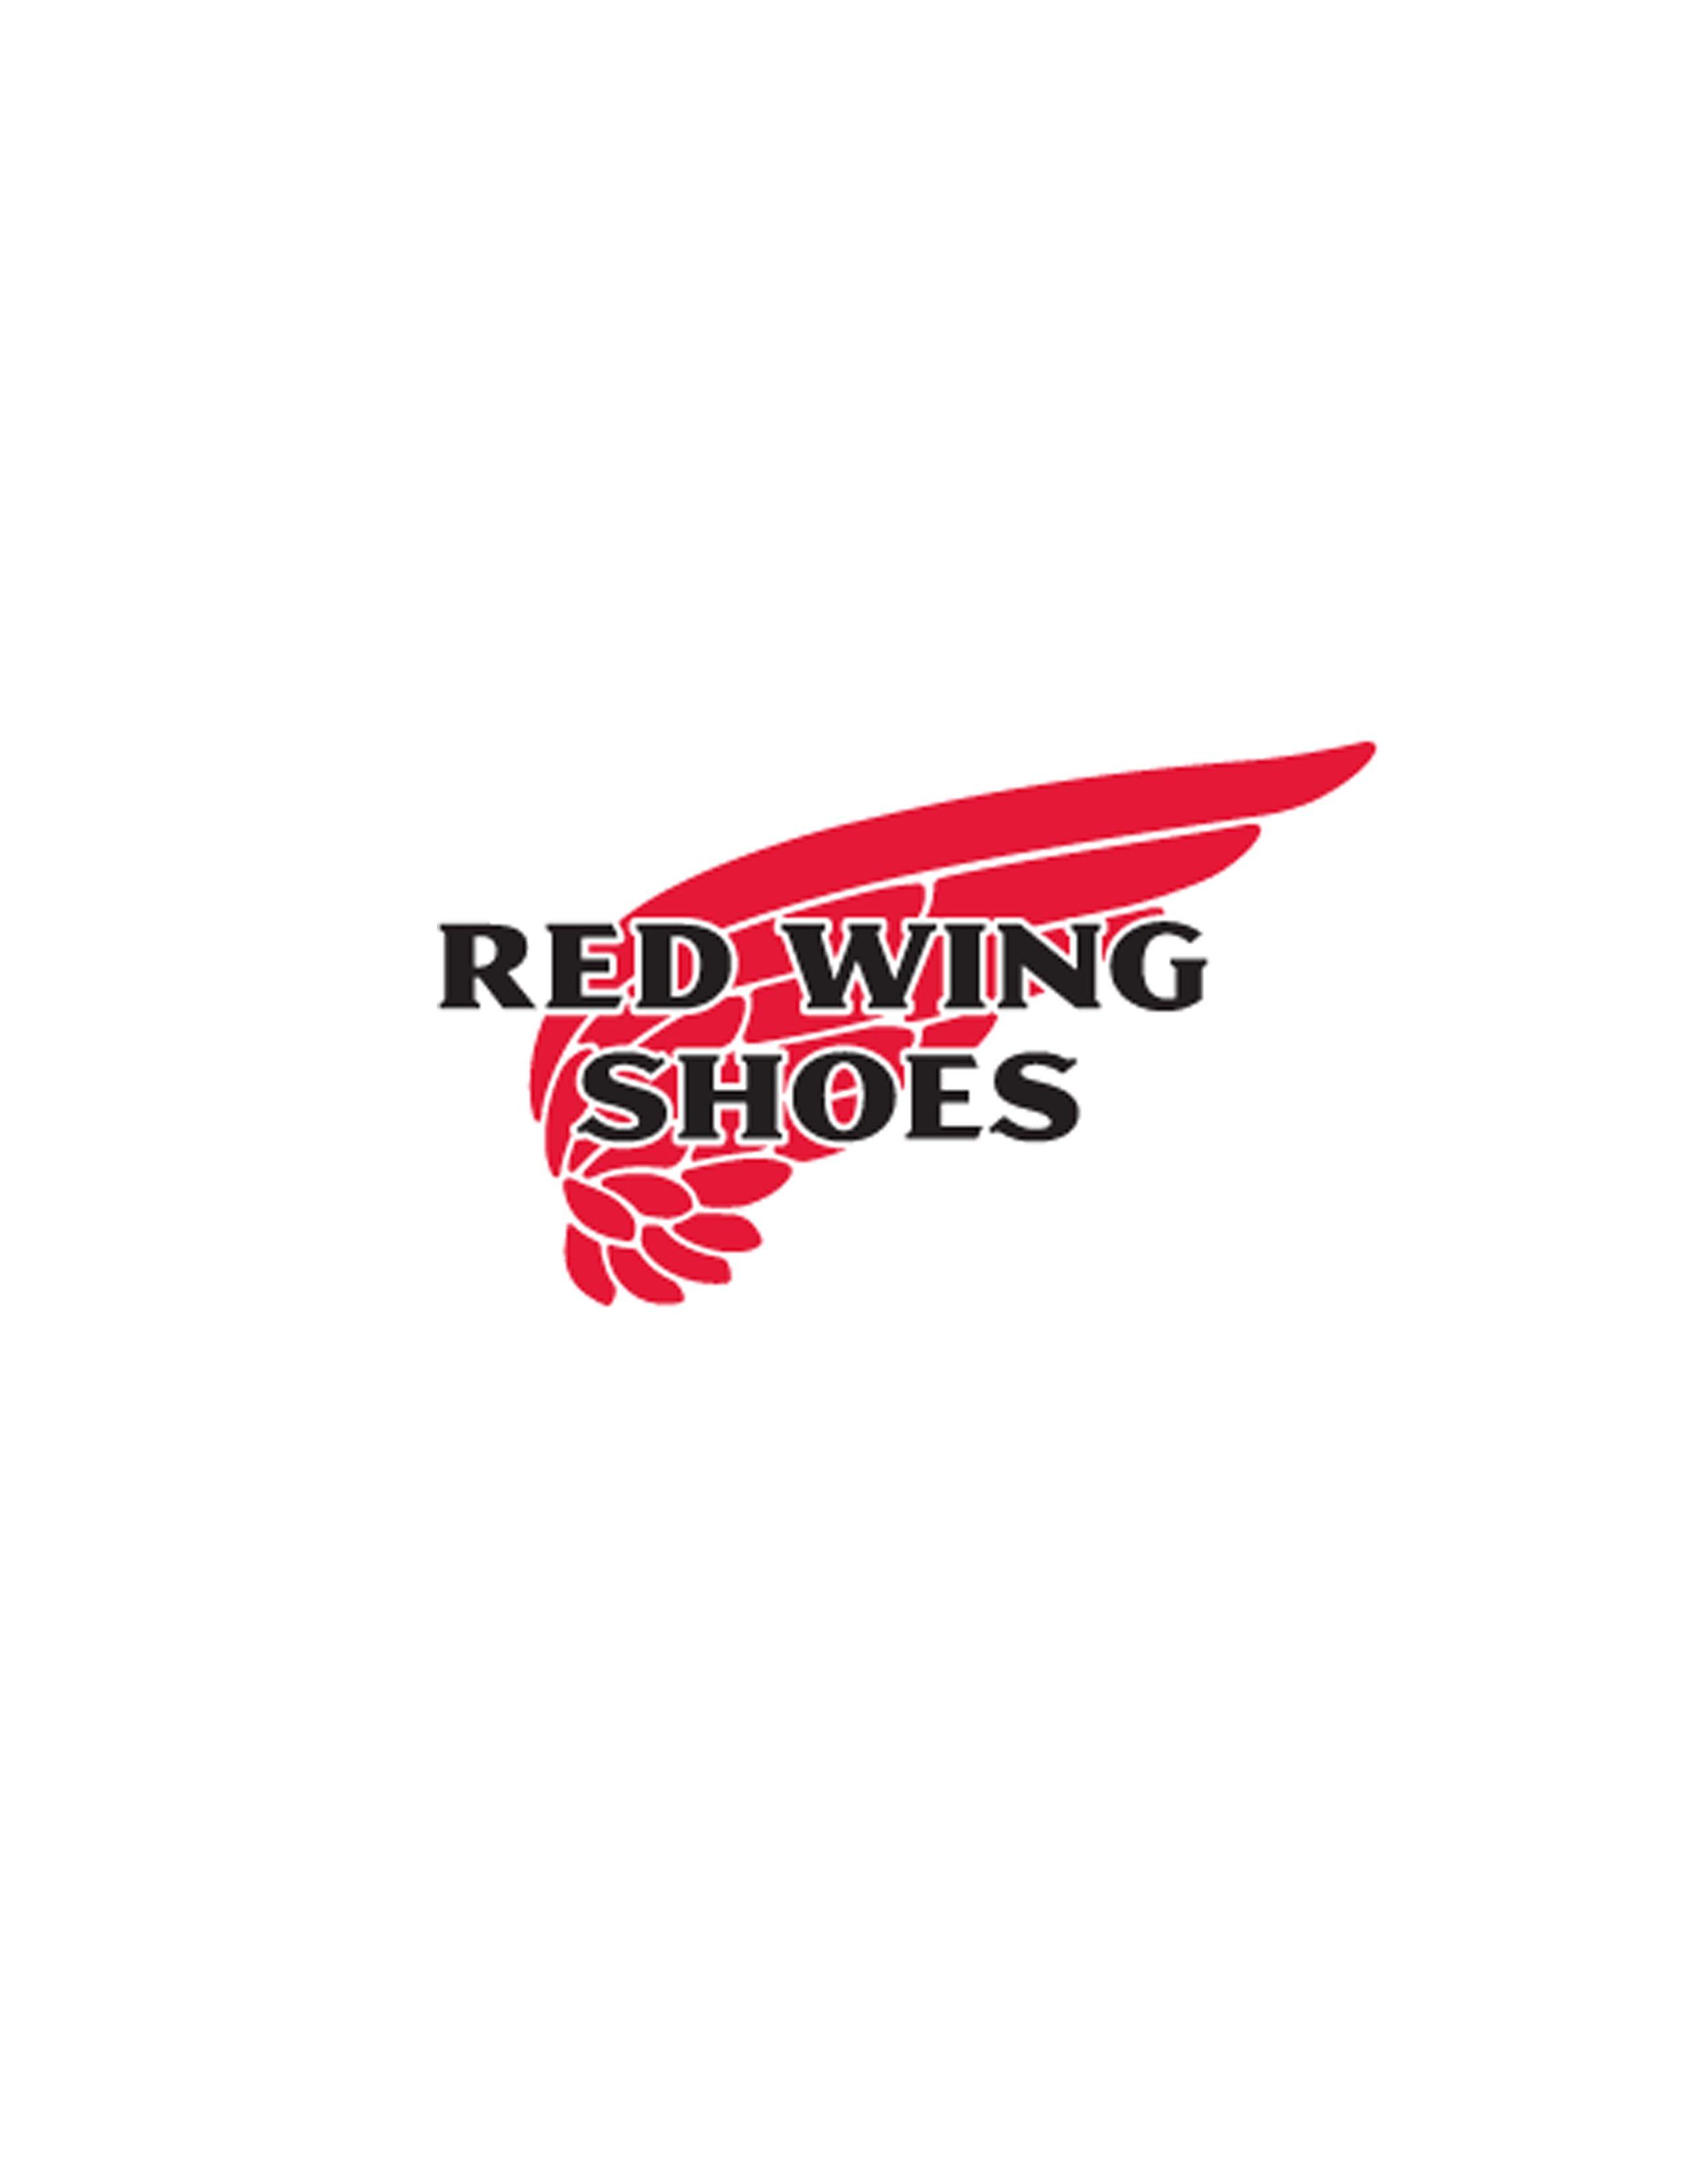 Red Wing Shoes Logo - Red wing shoes Logos